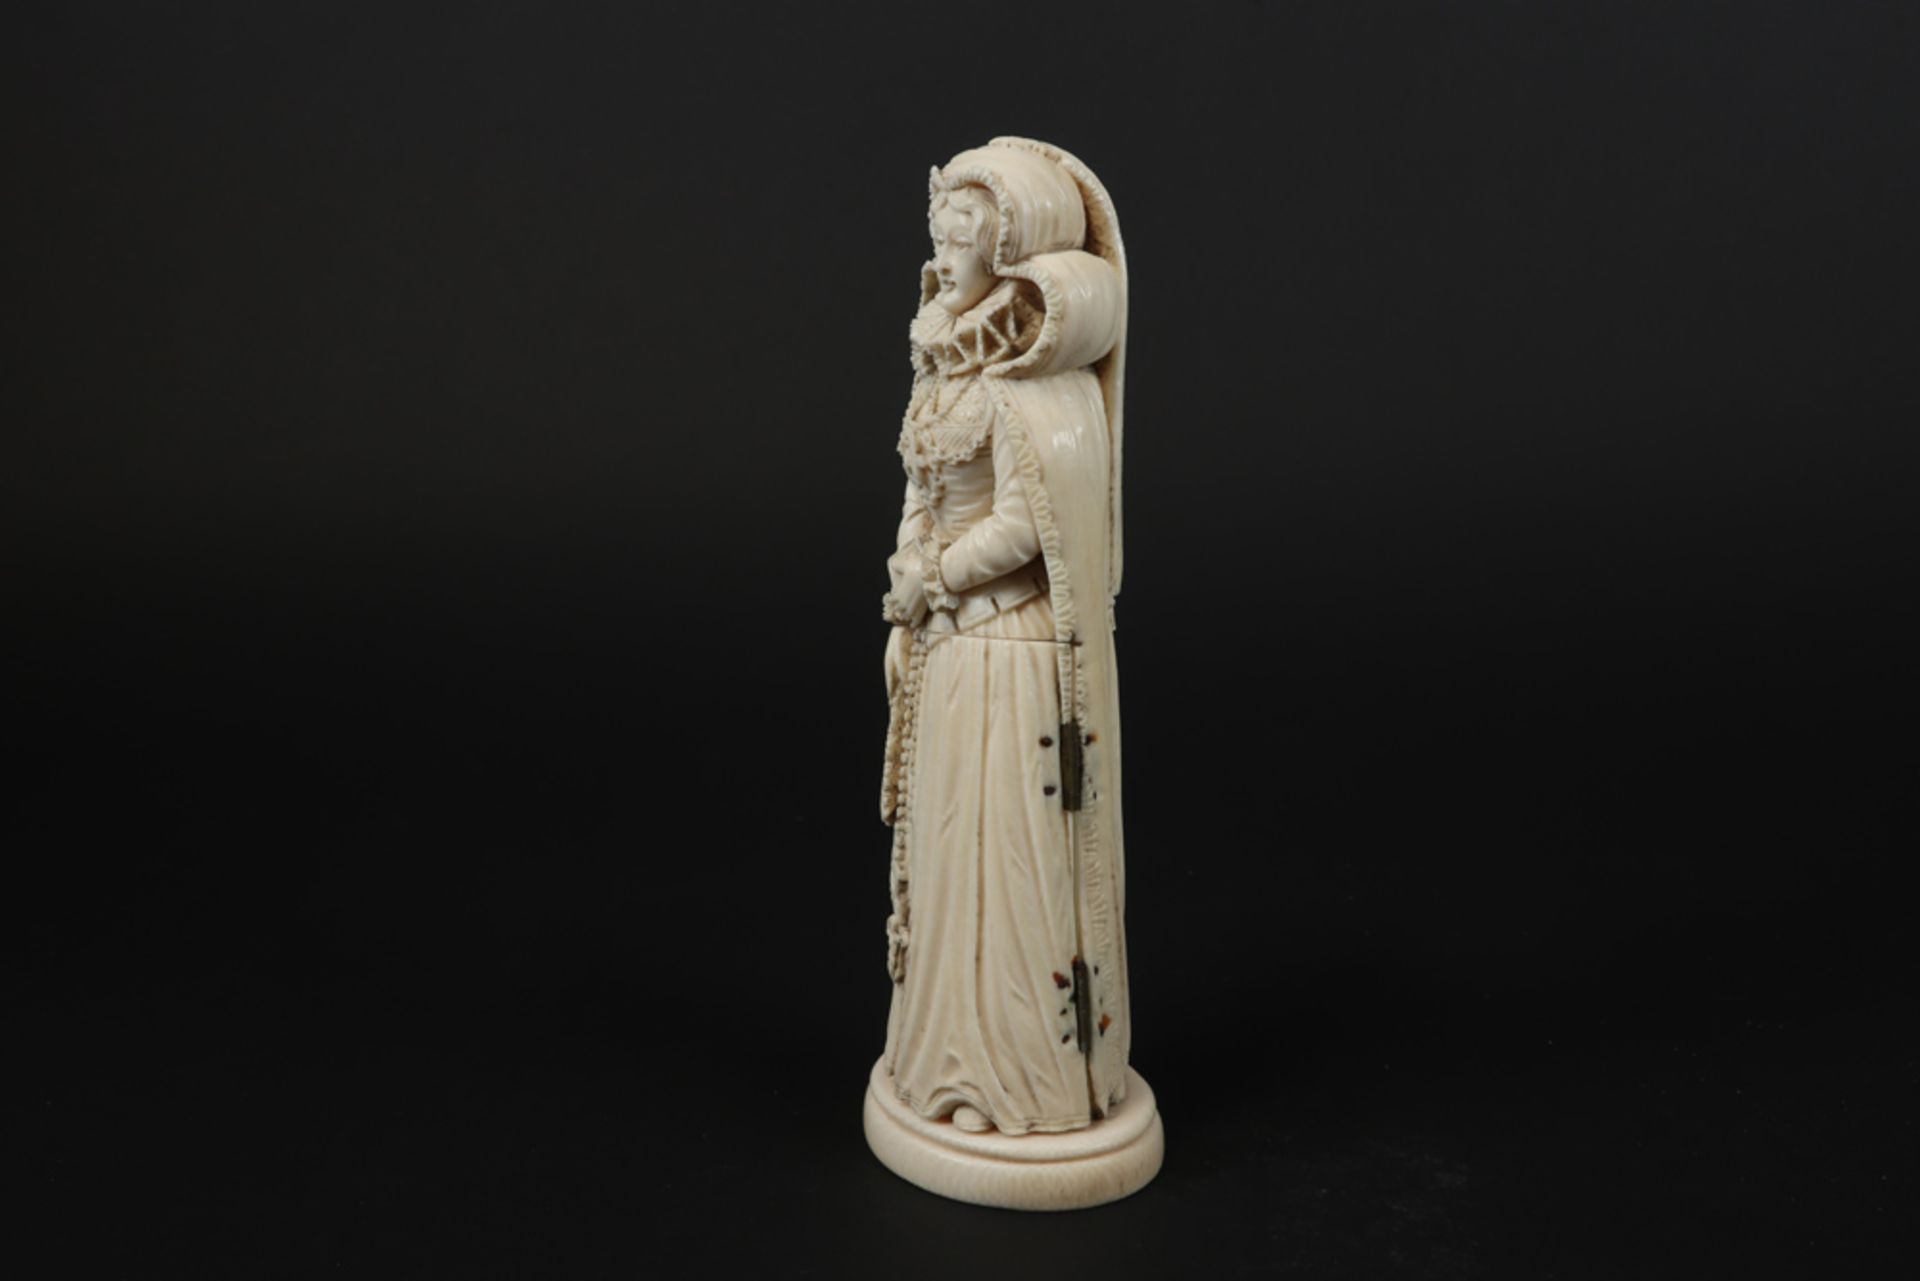 19th Cent European, presumably German, sculpture in ivory depicting Mary Stuart (queen of Scots) , - Image 2 of 8